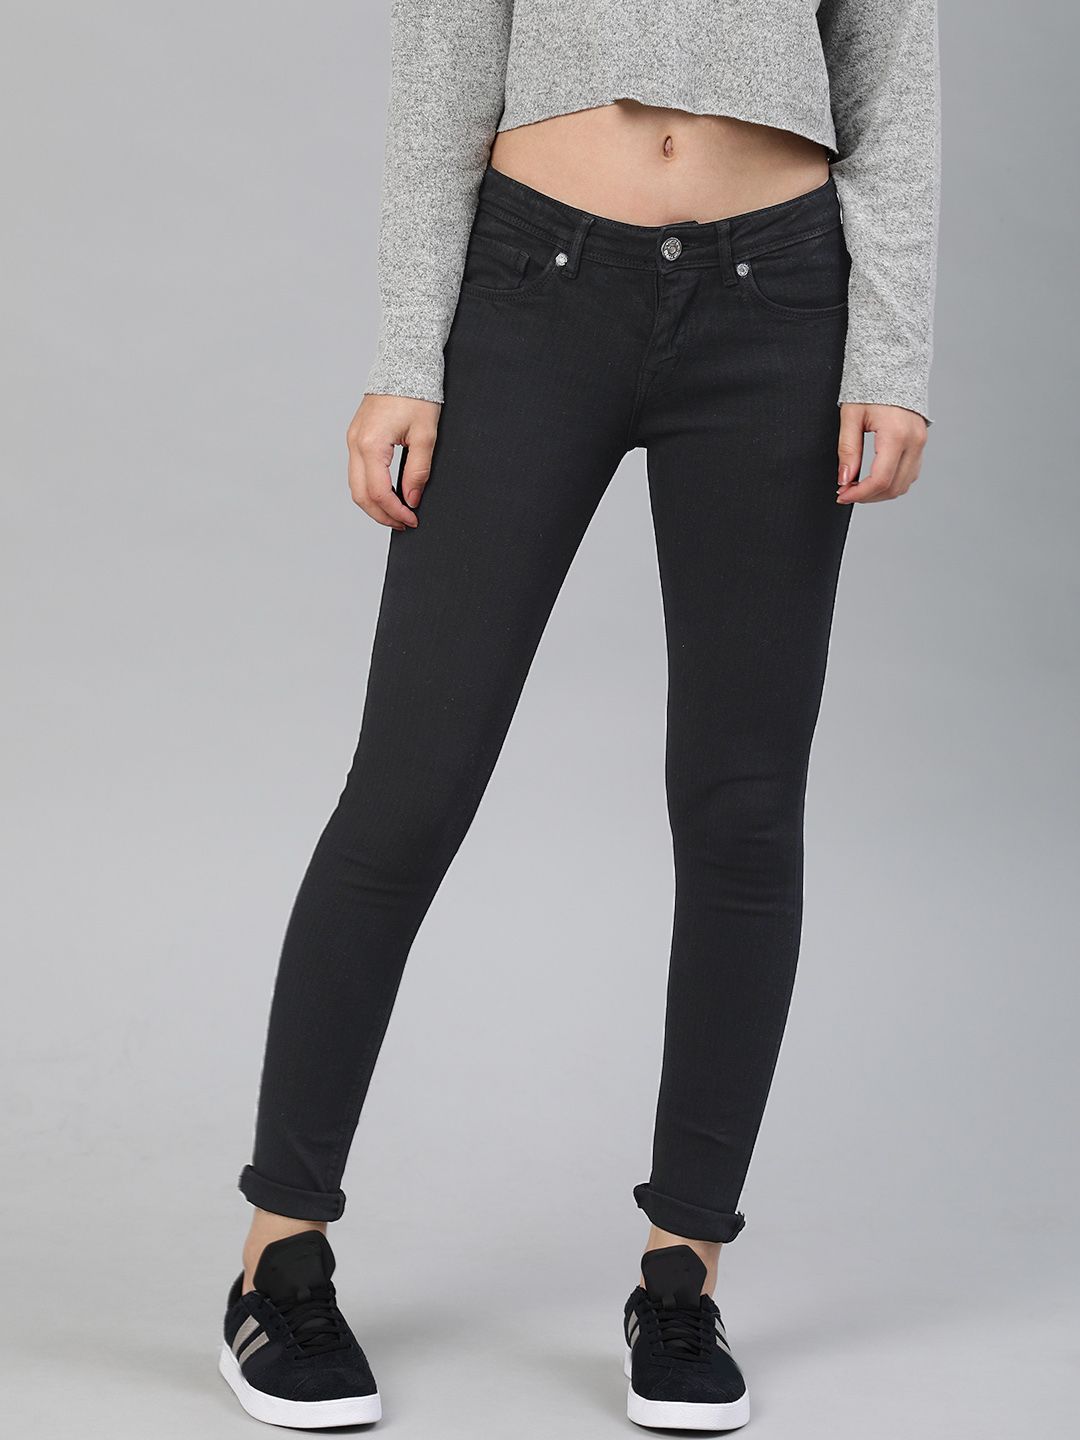 American Crew Women Black Slim Fit Mid-Rise Clean Look Stretchable Jeans Price in India